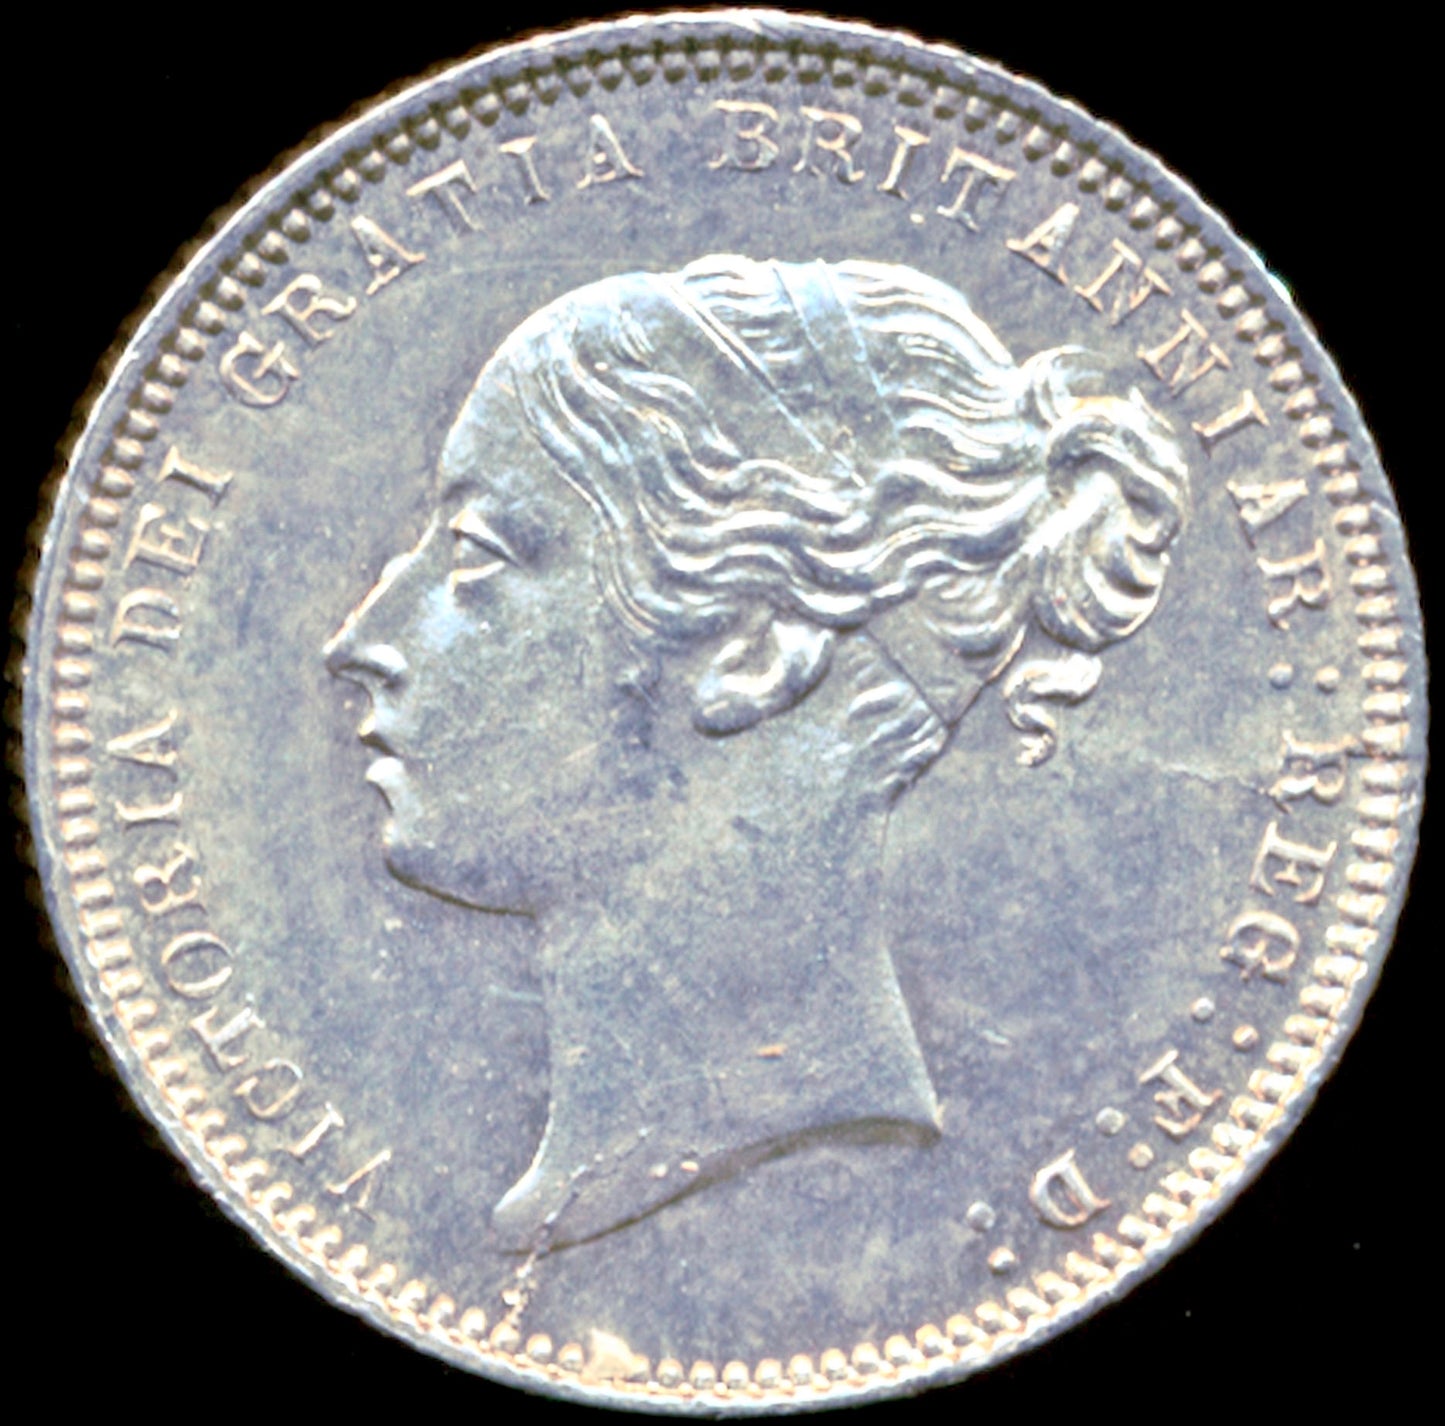 1870 Sixpence Second young head die 4 S3910 ESC 3221 Very rare (R2) UNC